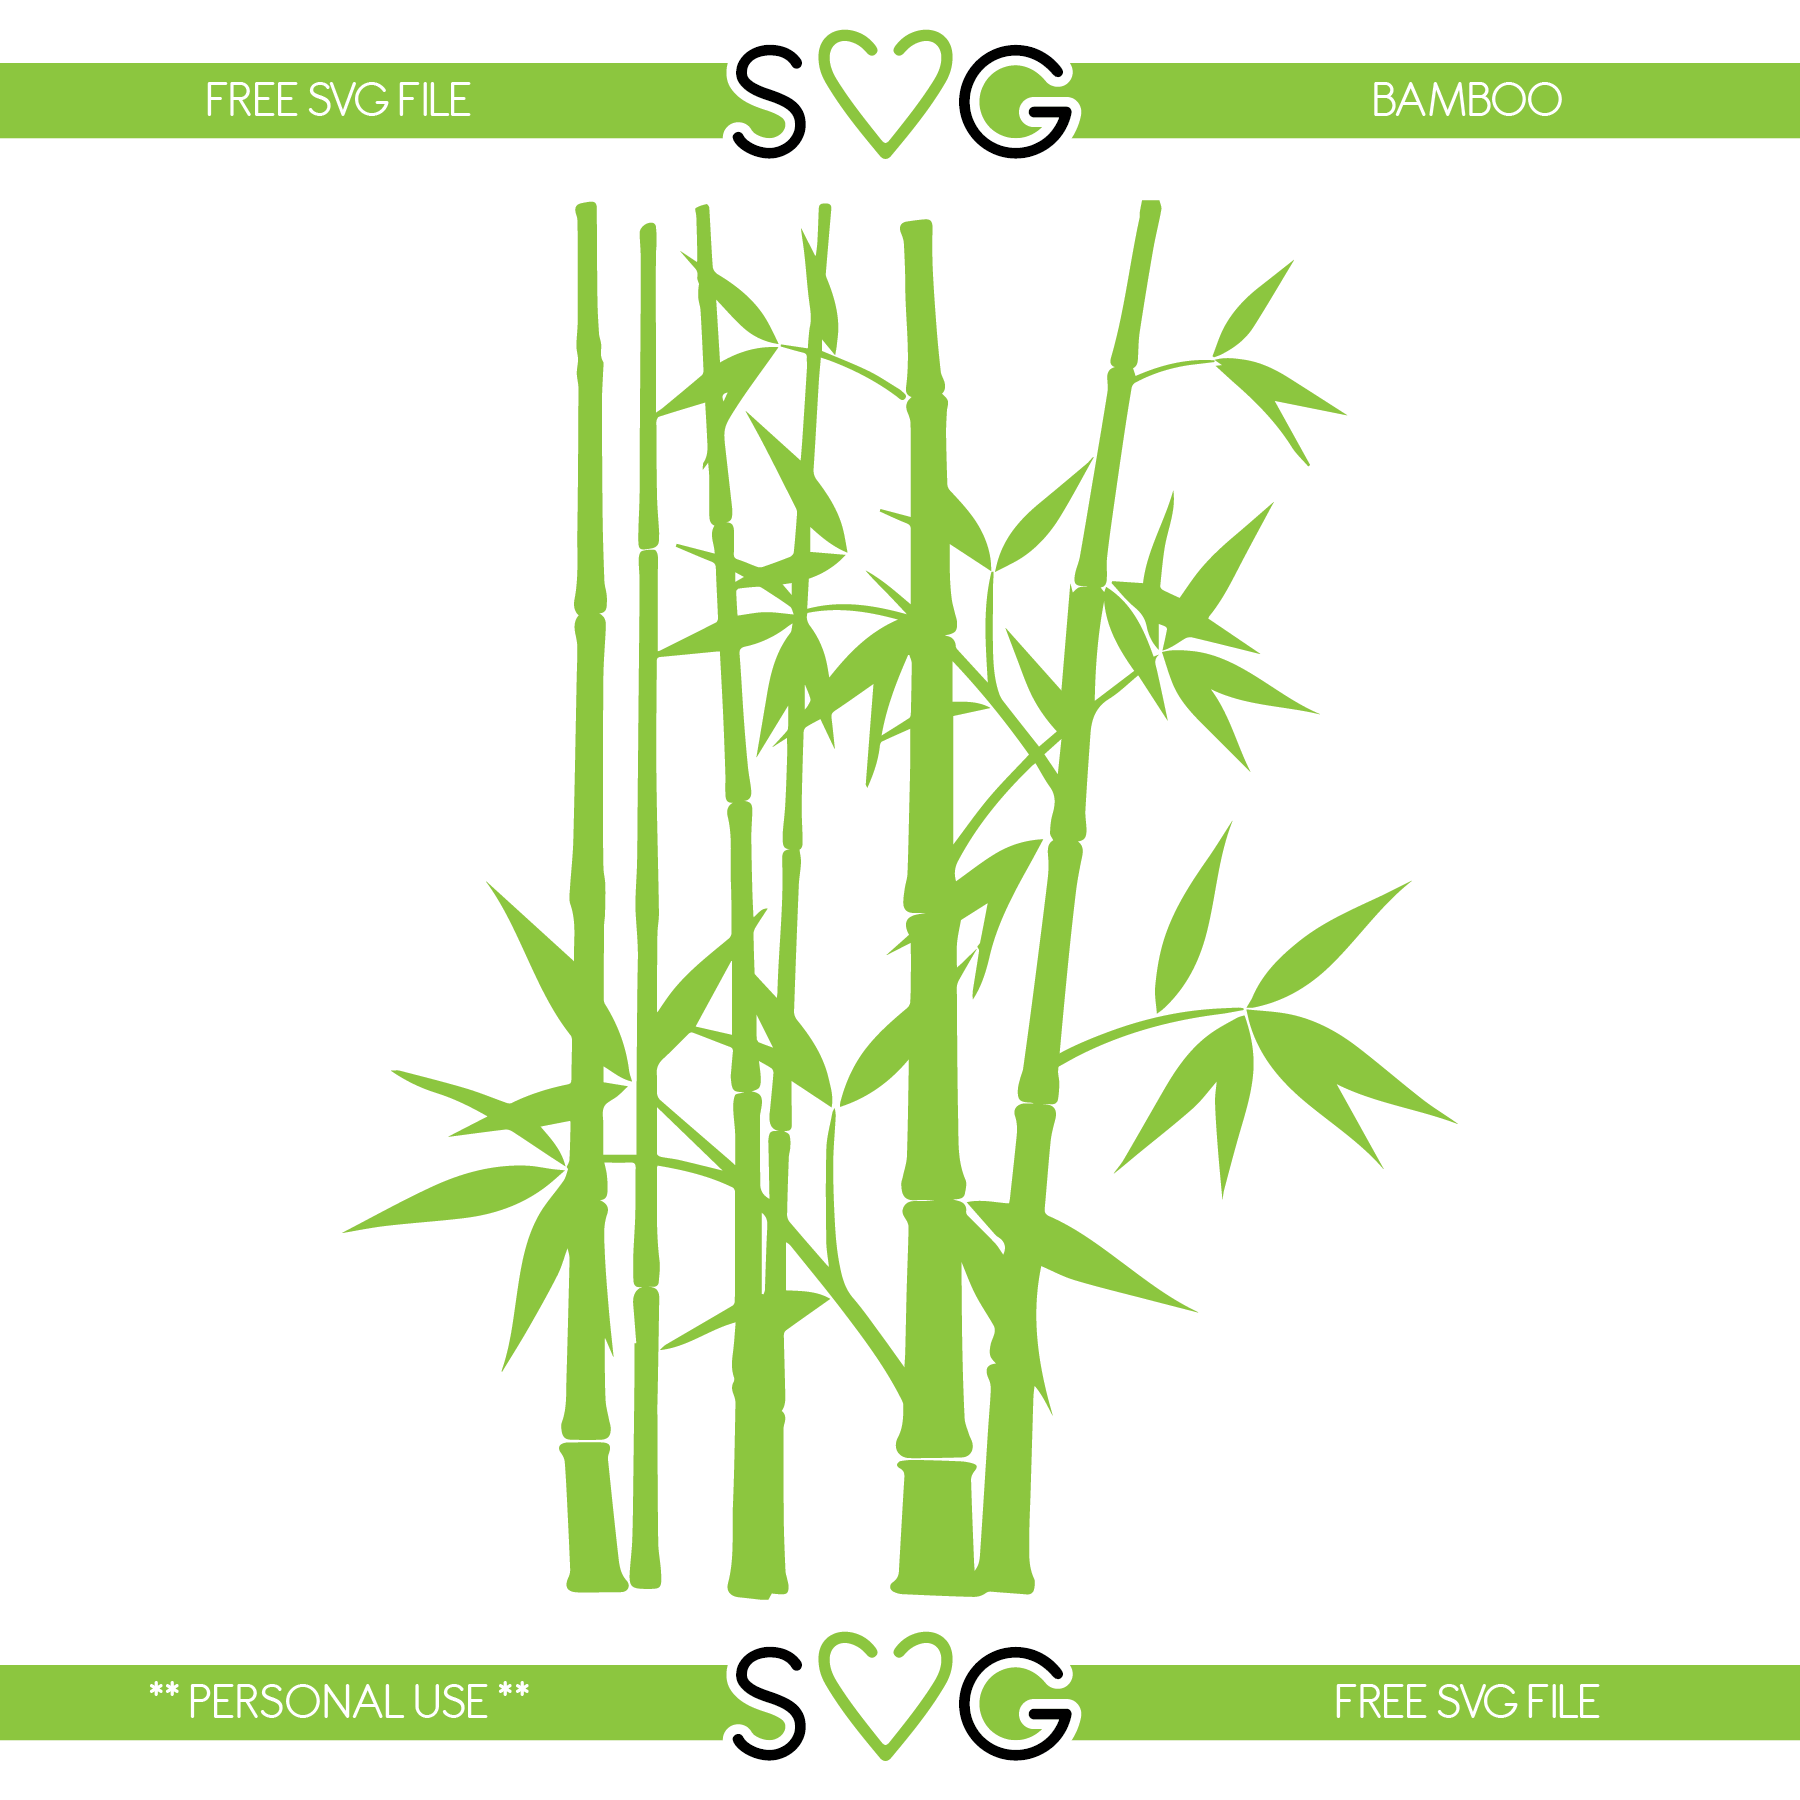 Bamboo svg #8, Download drawings